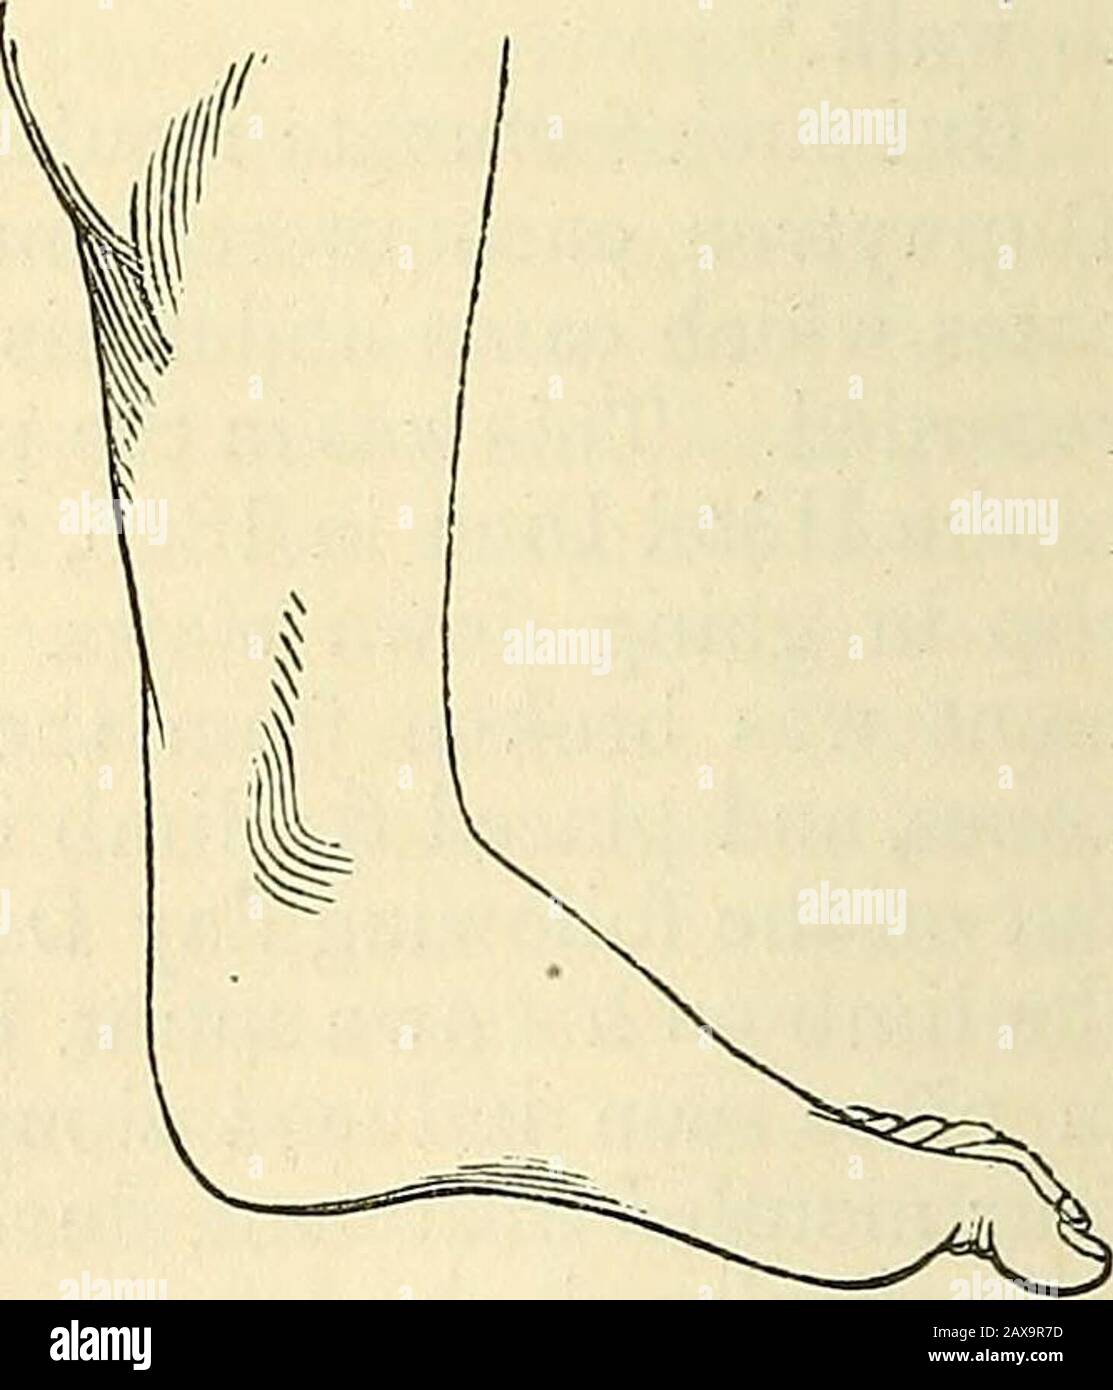 A practical treatise on fractures and dislocations . Dislocations of the lower end of the tibia backwards. Reduction should be attempted by a method similar to that whichhas been recommended in all the other dislocations of the ankle; onlywith such modifications as the peculiarities of the case must neces-sarily suggest. UPPER END OF THE FIBULA FORWARDS. 725 CHAPTER XX. DISLOCATIONS OP THE UPPER END OF THE FIBULA. Syn.—Luxations of the superior peroneo-tibial articulation; Malgaigne. Surgeons have frequently described a condition of the peroneo-tibial articulation in which the ligaments have b Stock Photo